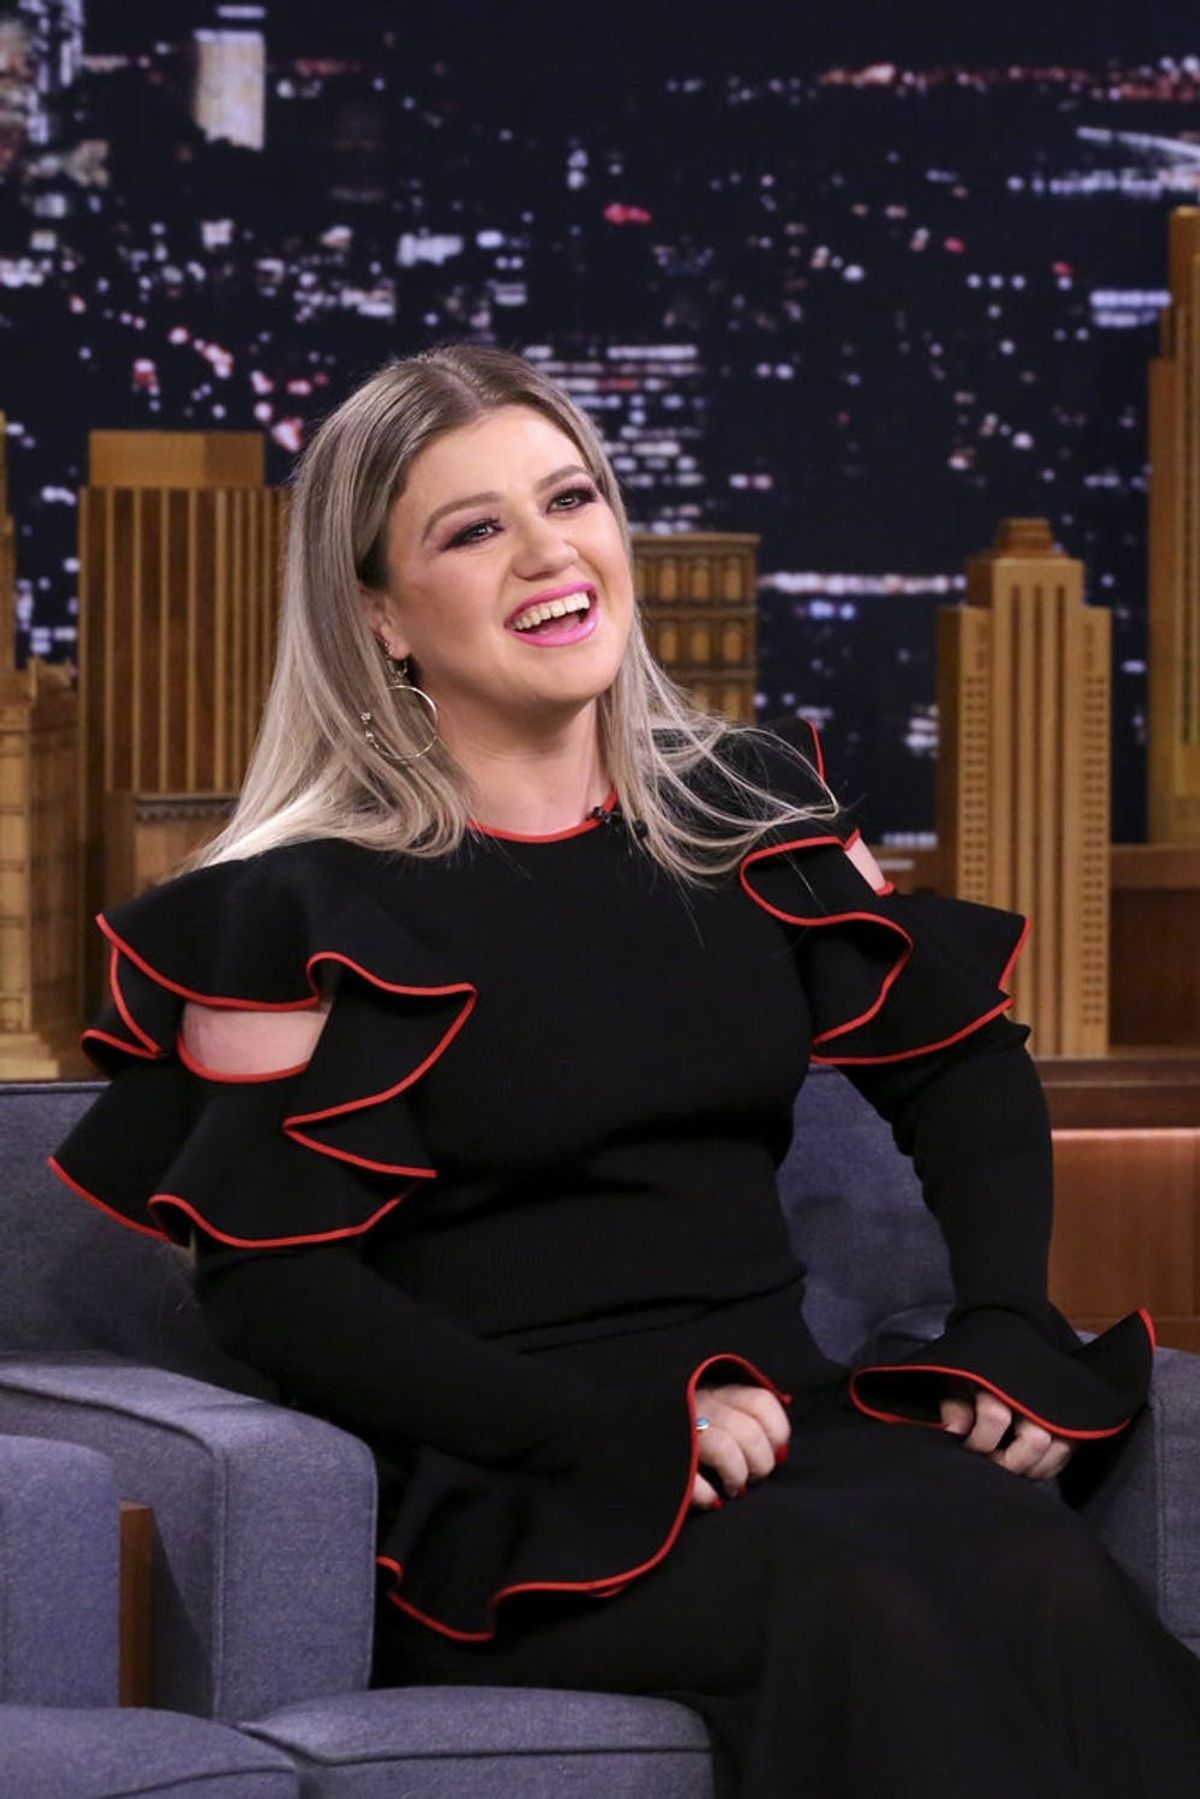 Kelly Clarkson Just Revealed Some Fun New Details About Her Daytime Talk Show